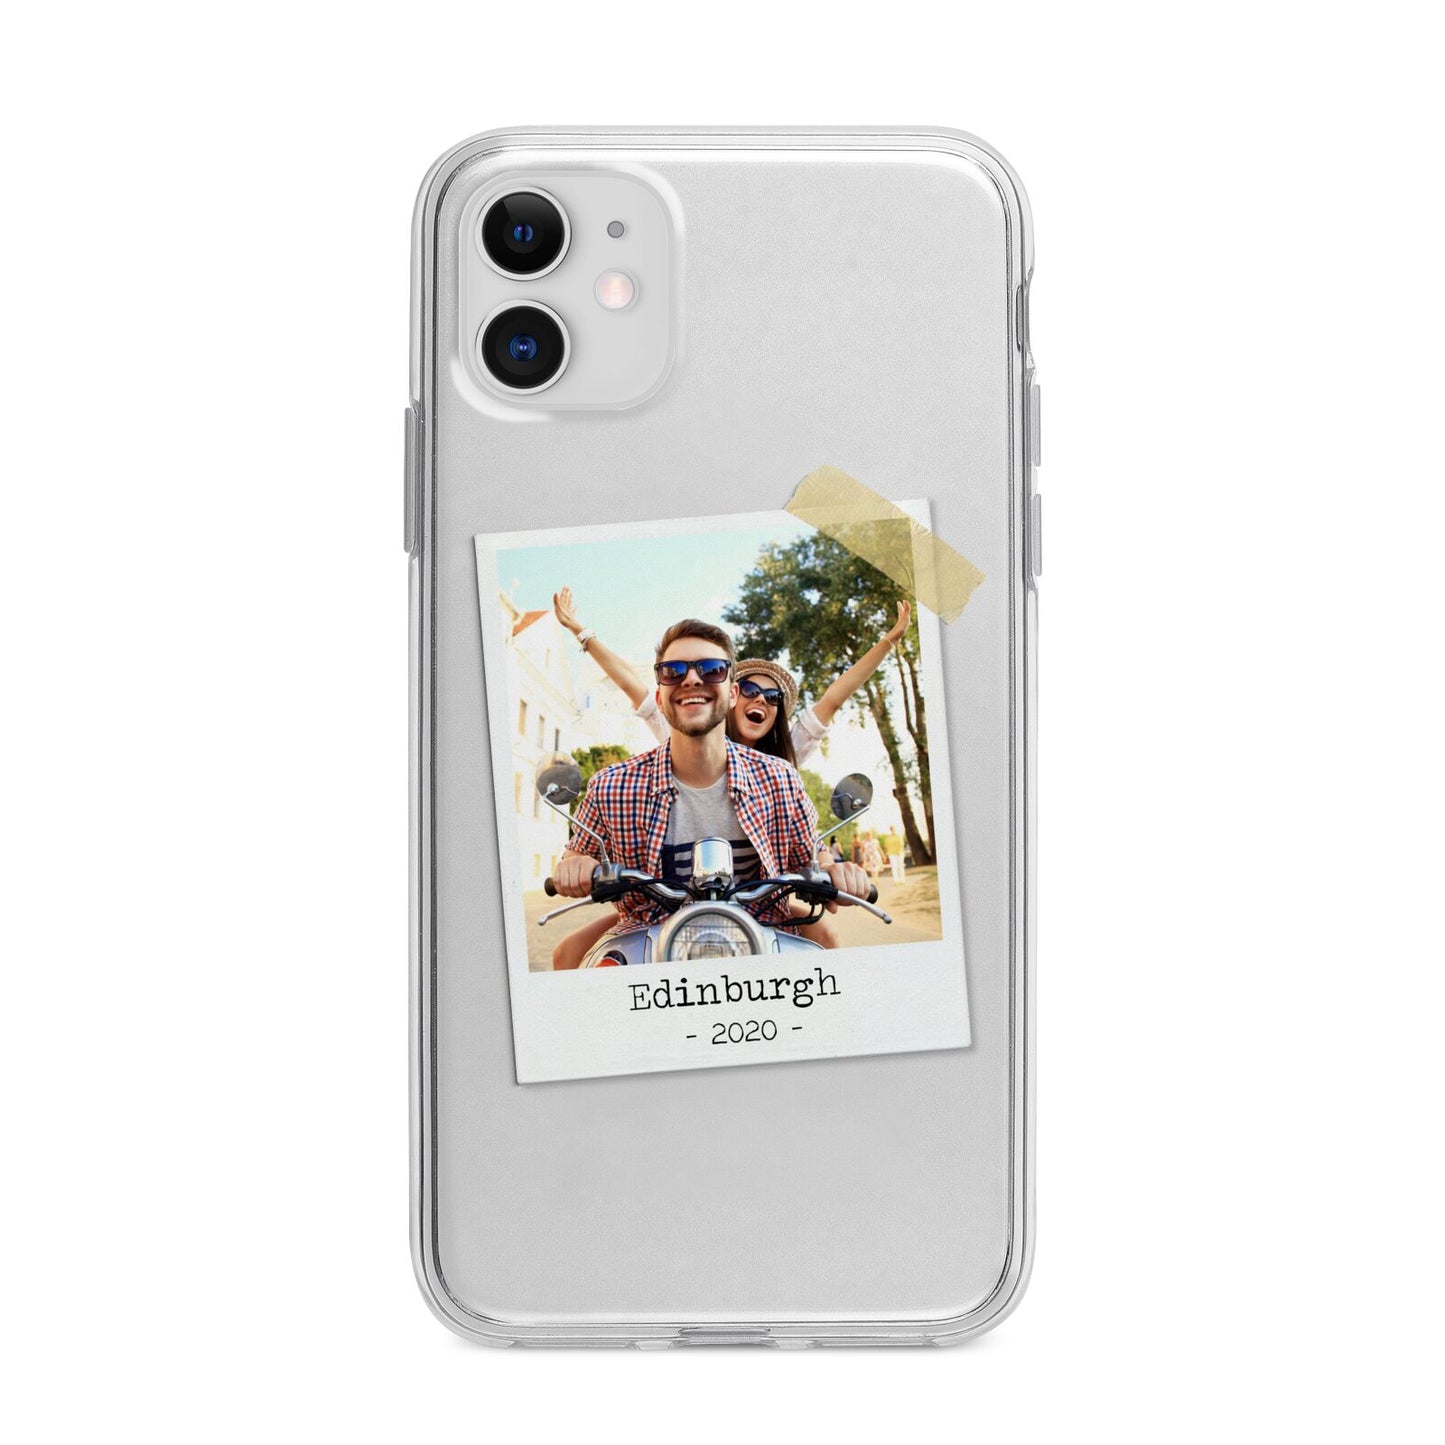 Taped Holiday Snap Photo Upload Apple iPhone 11 in White with Bumper Case